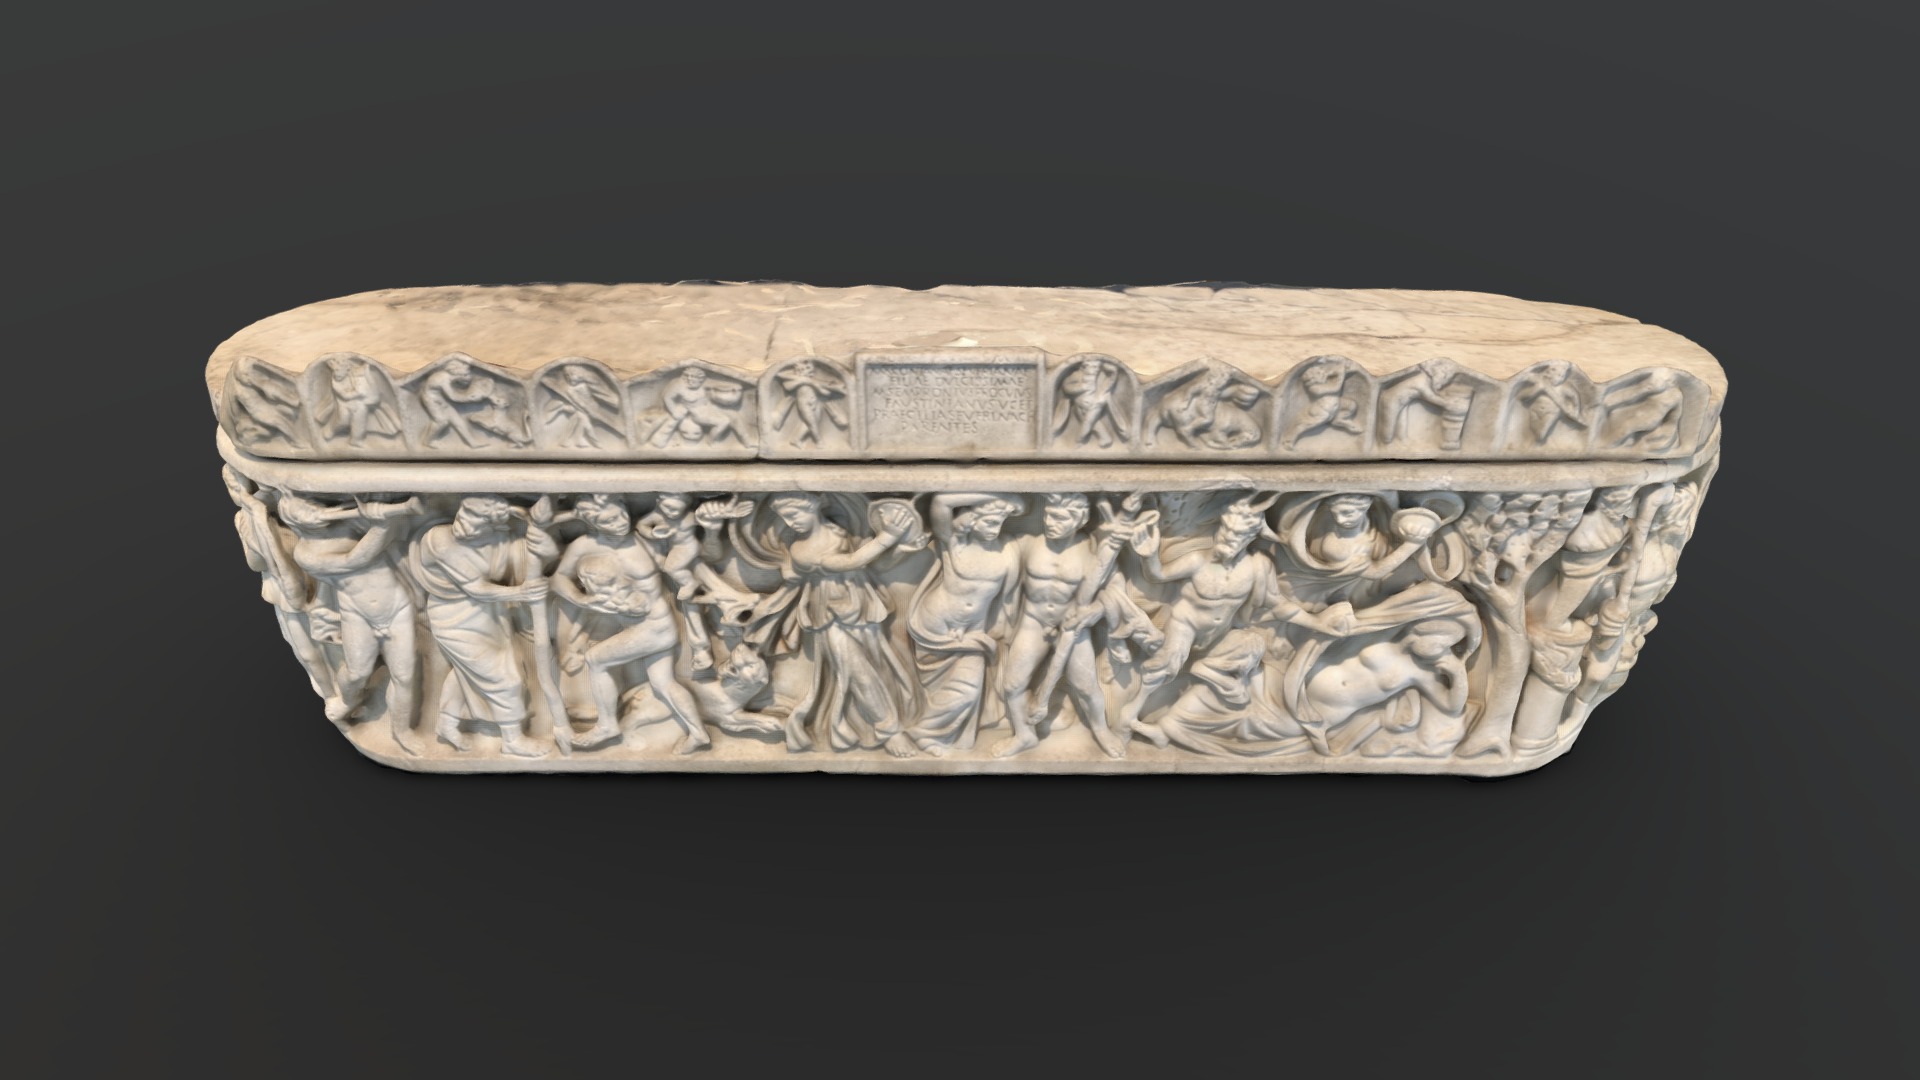 3D model Stone Sarcophagus (photogrammetry scan) - This is a 3D model of the Stone Sarcophagus (photogrammetry scan). The 3D model is about a stone carving of a group of people.